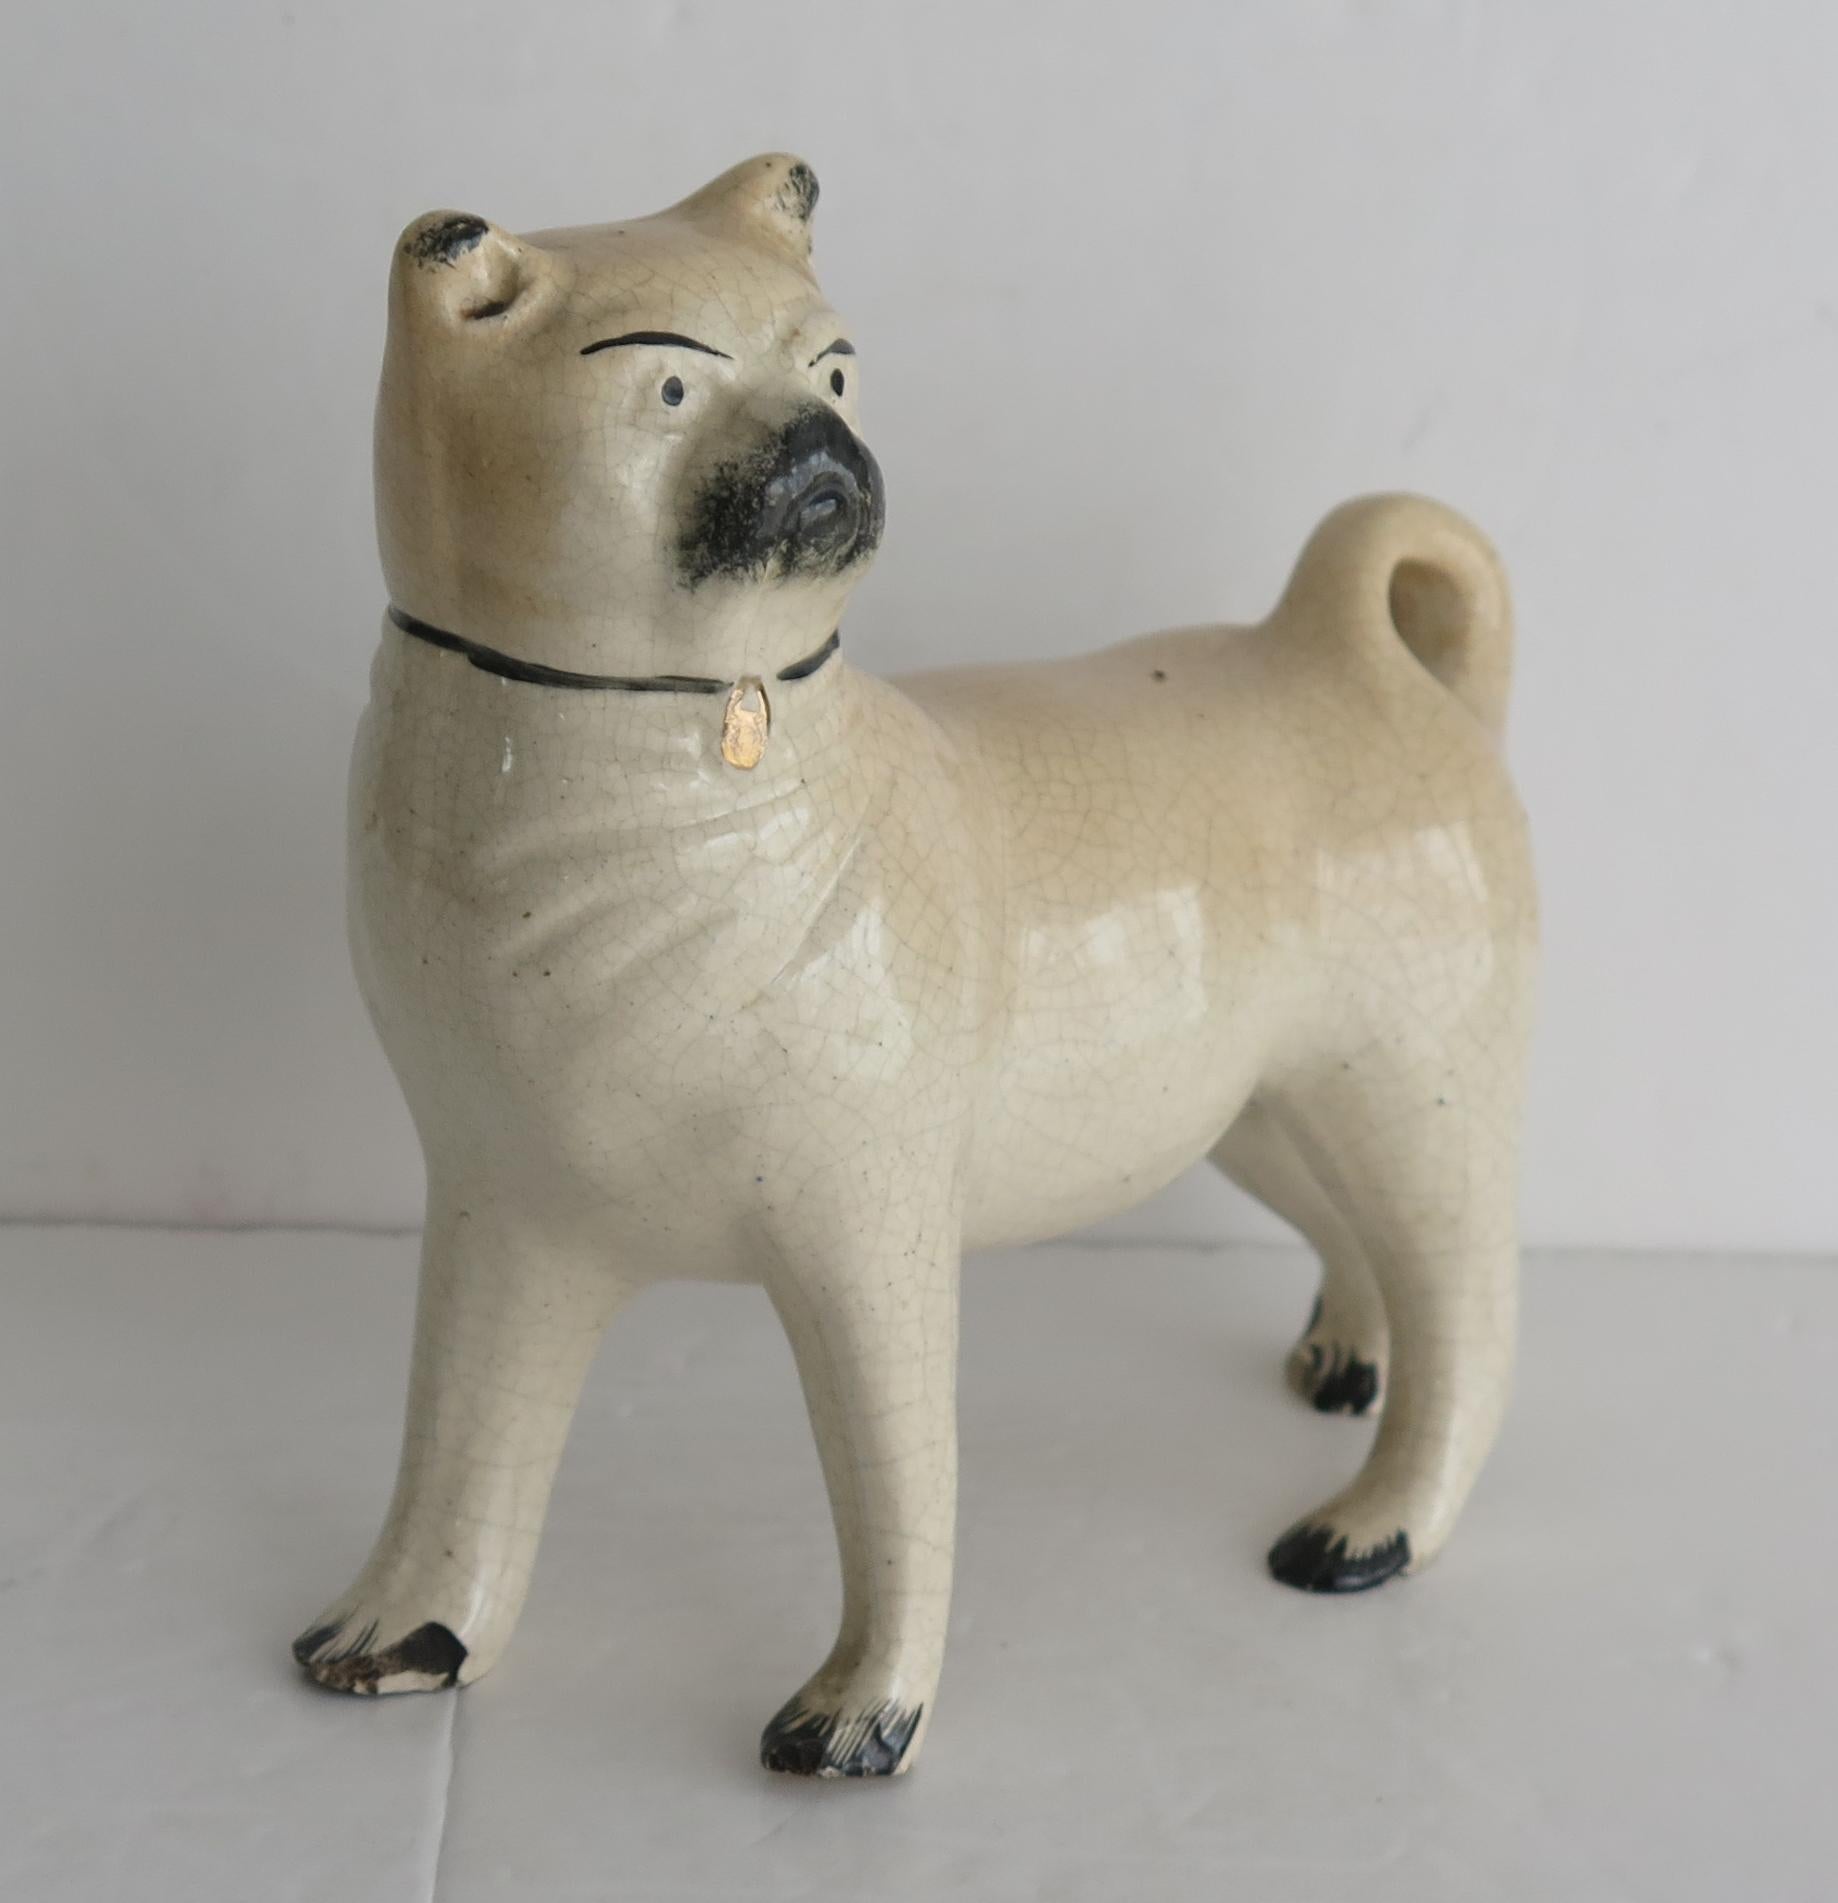 This is a good pottery figurine of a Pug Dog made by one of the Staffordshire potters, which we date to mid 19th Century early Victorian England.

The dog figure is well modelled then hand painted with a gilded name tag to the collar.

There are